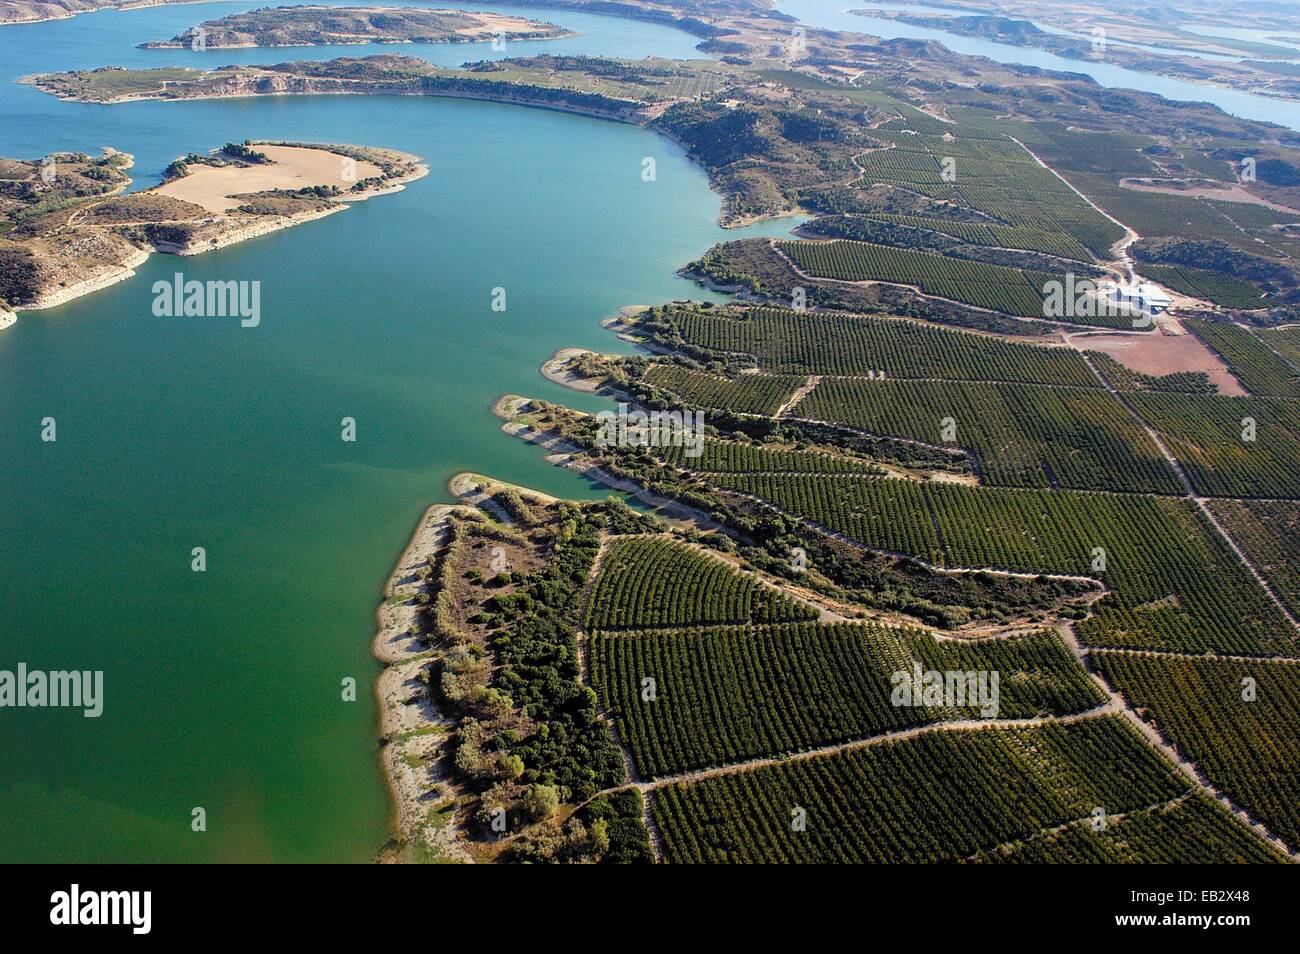 The Caspe Sea, The Aragon Sea, Reservoir of Mequinenza, a man made reservoir formed by a dam on the Ebro River. Stock Photo